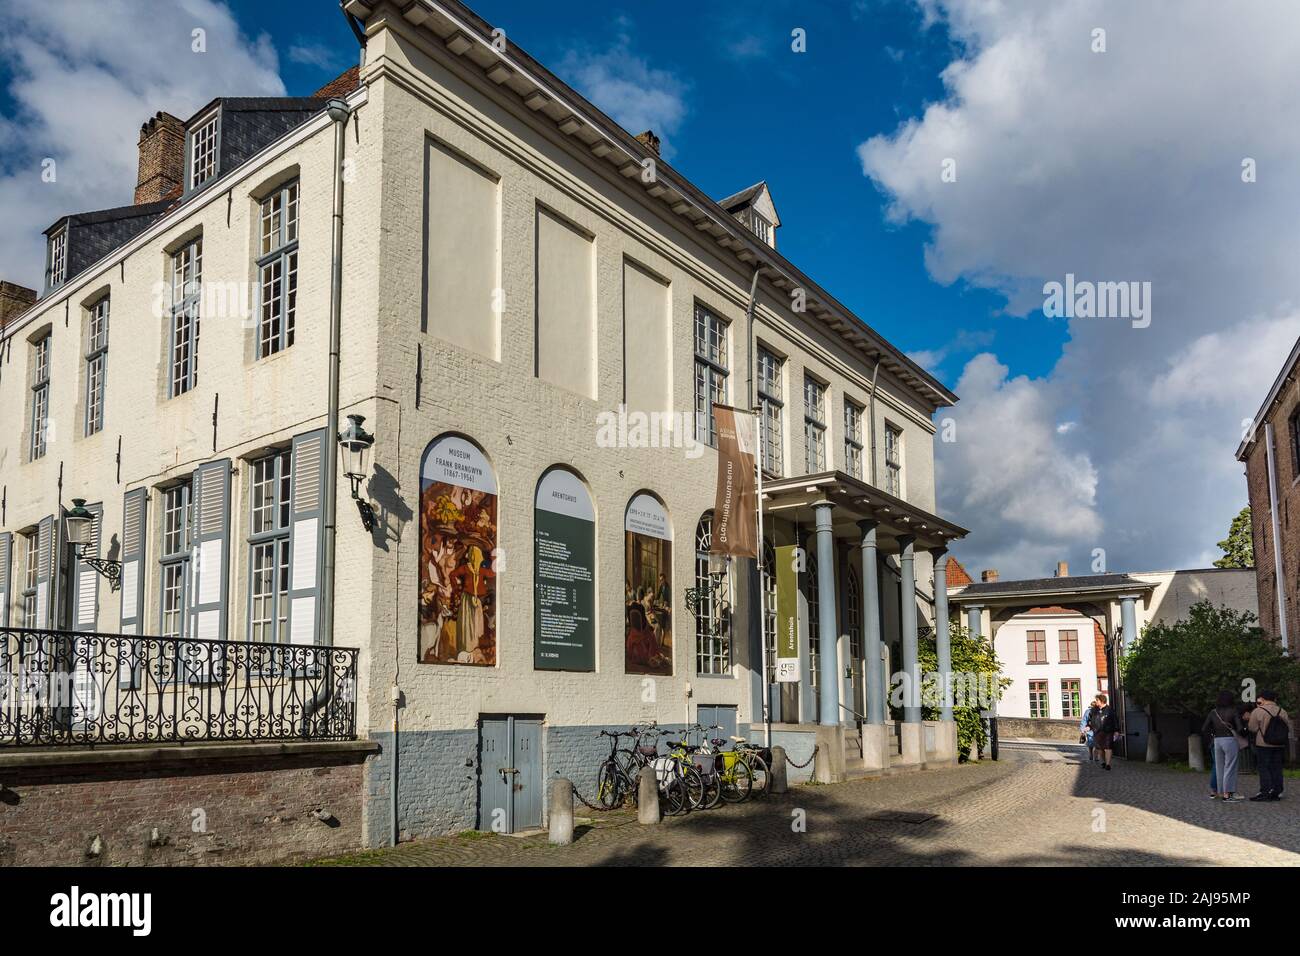 Bruges, Belgium - September 14, 2017: The Groeningemuseum is a municipal museum in Bruges, Belgium, built on the site of the medieval Eekhout Abbey. Stock Photo